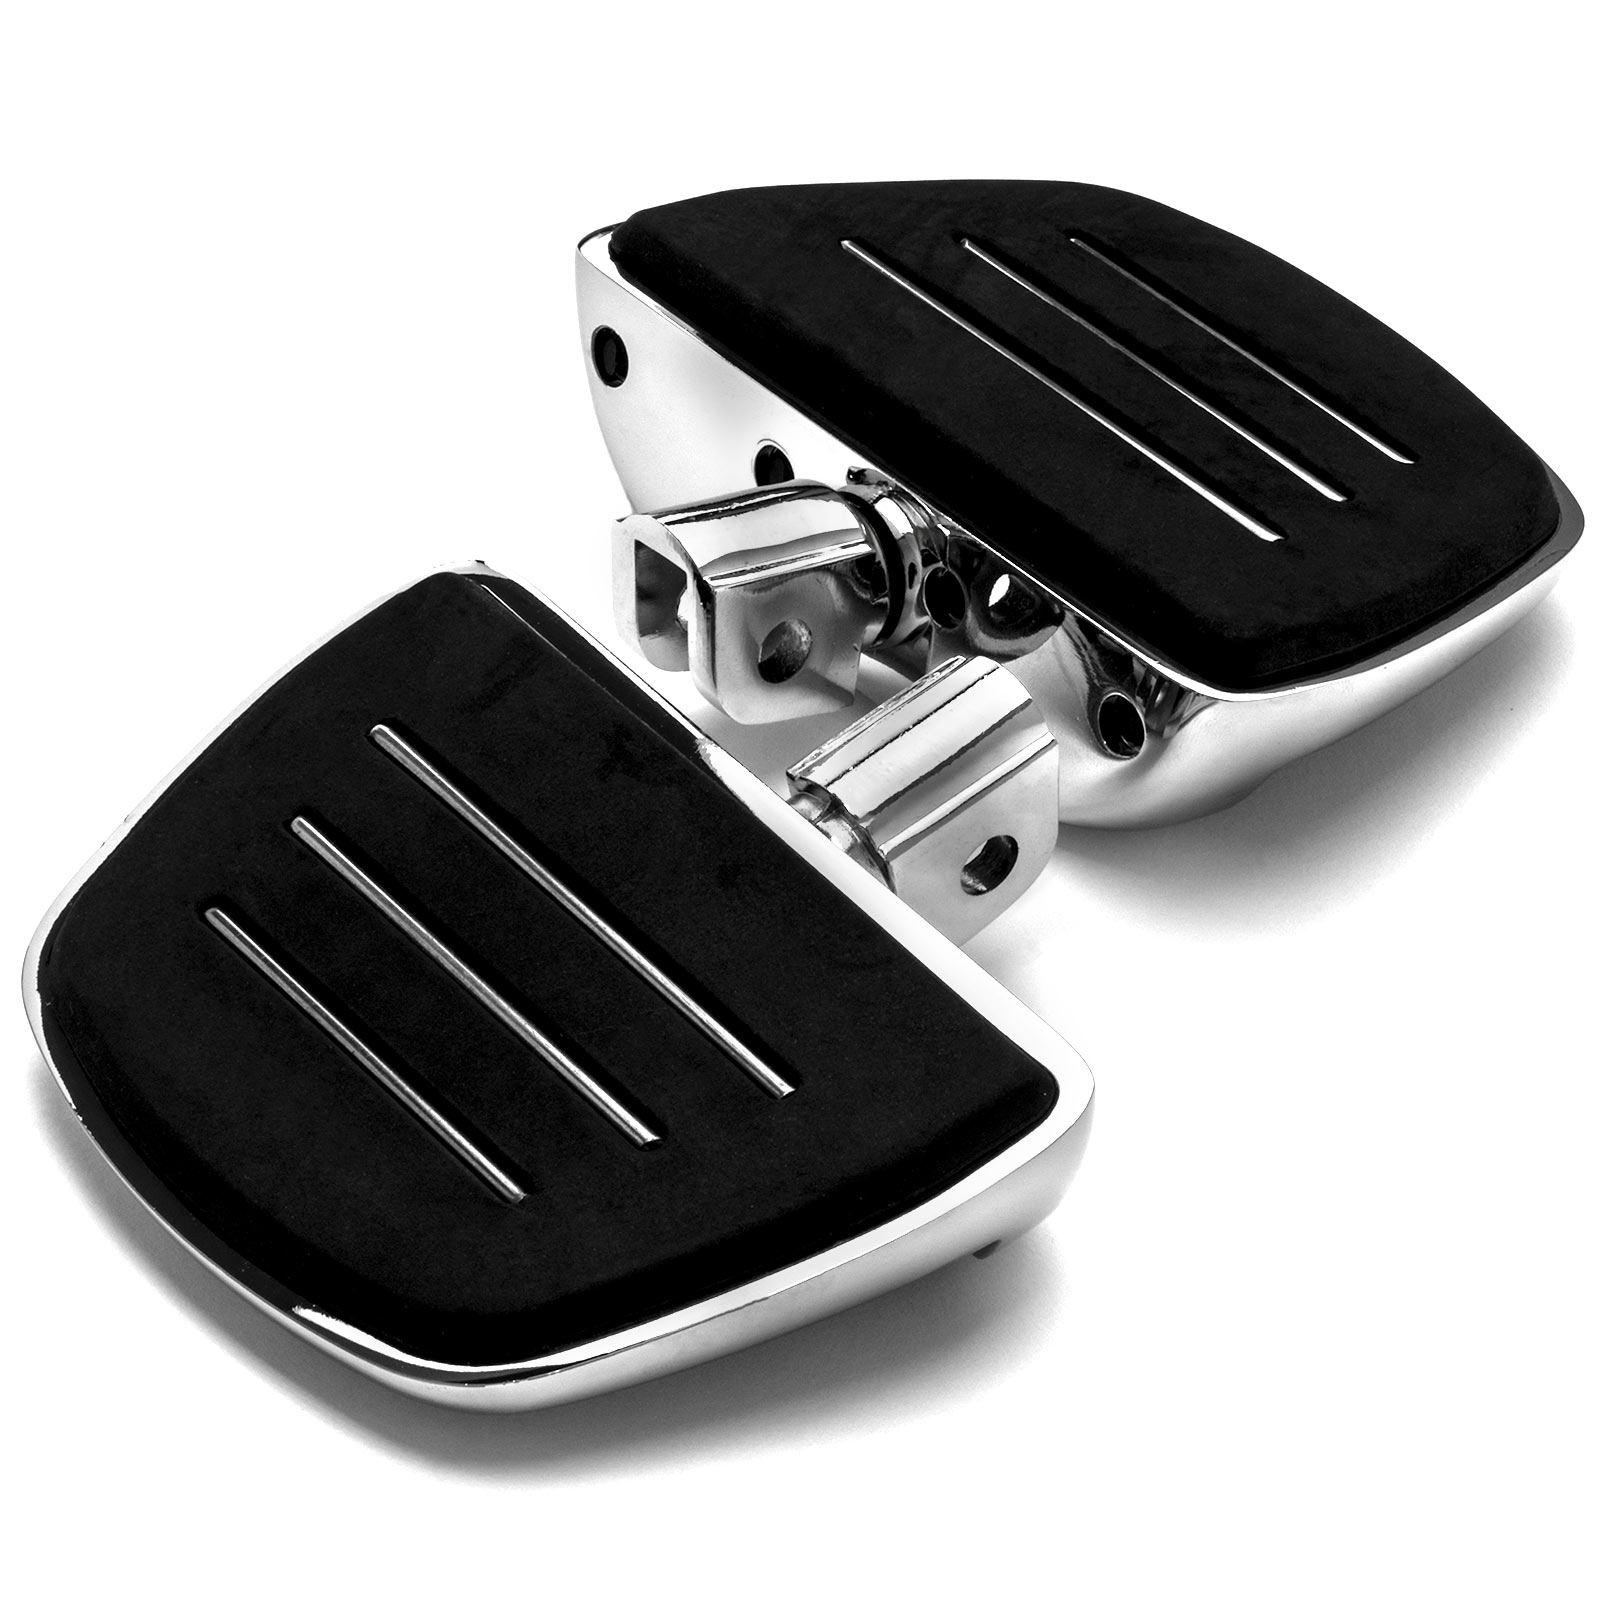 Krator Chrome Mini Board Floorboards Footpegs Compatible with Suzuki M109R 2006-2018 (Front Only)